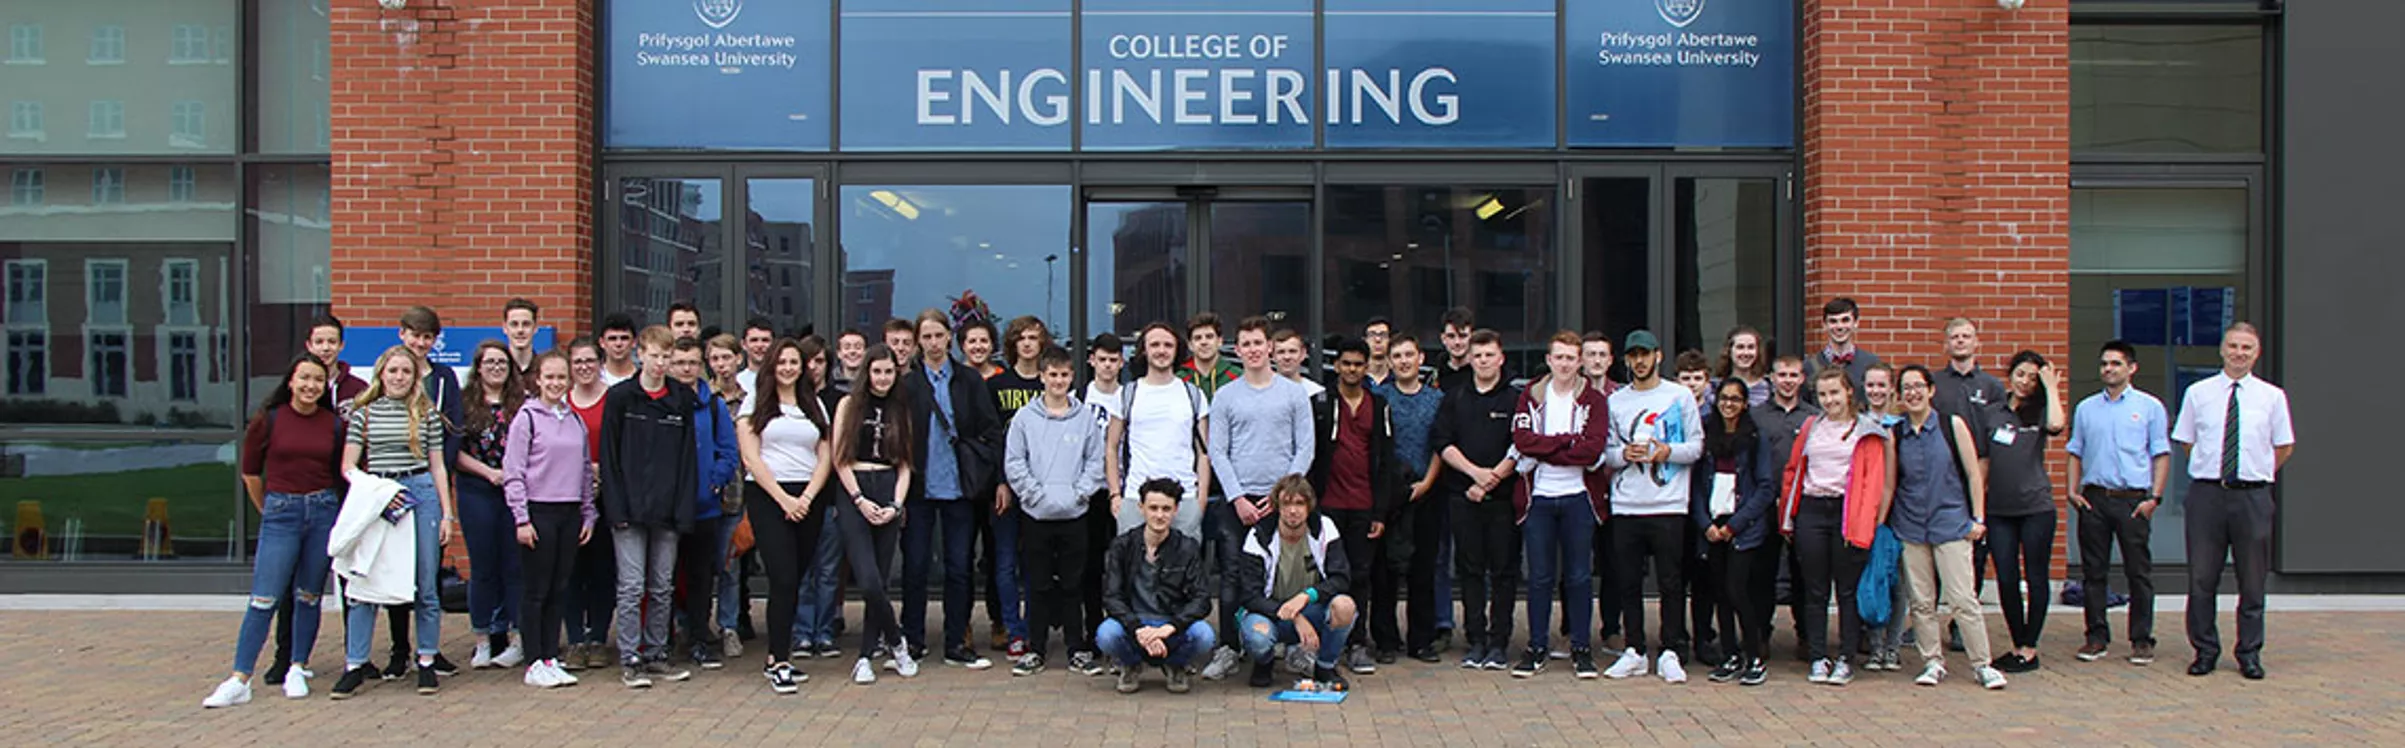 Summer School students standing outside the College of Engineering